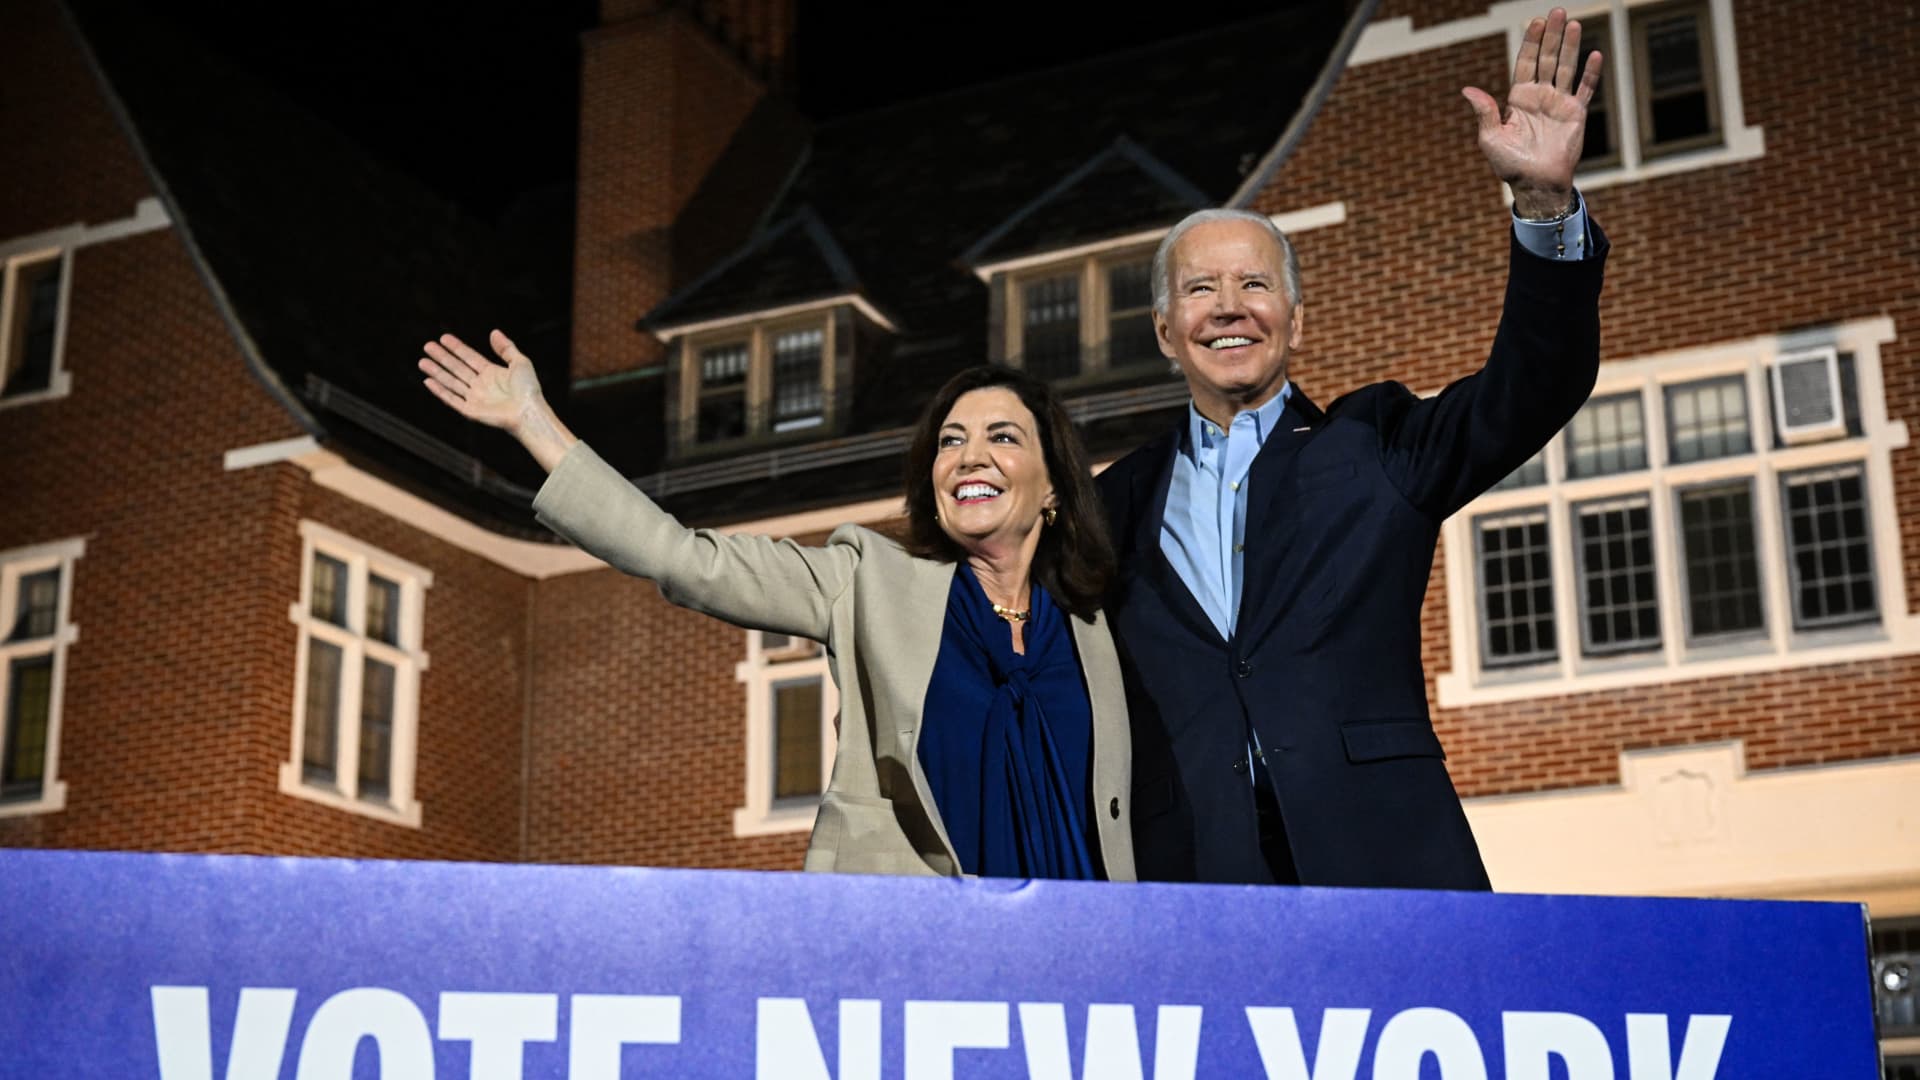 US President Joe Biden and New York Governor Kathy Hochul wave during a rally for Democratic candidates at Sarah Lawrence College in Bronxville, New York, November 6, 2022.